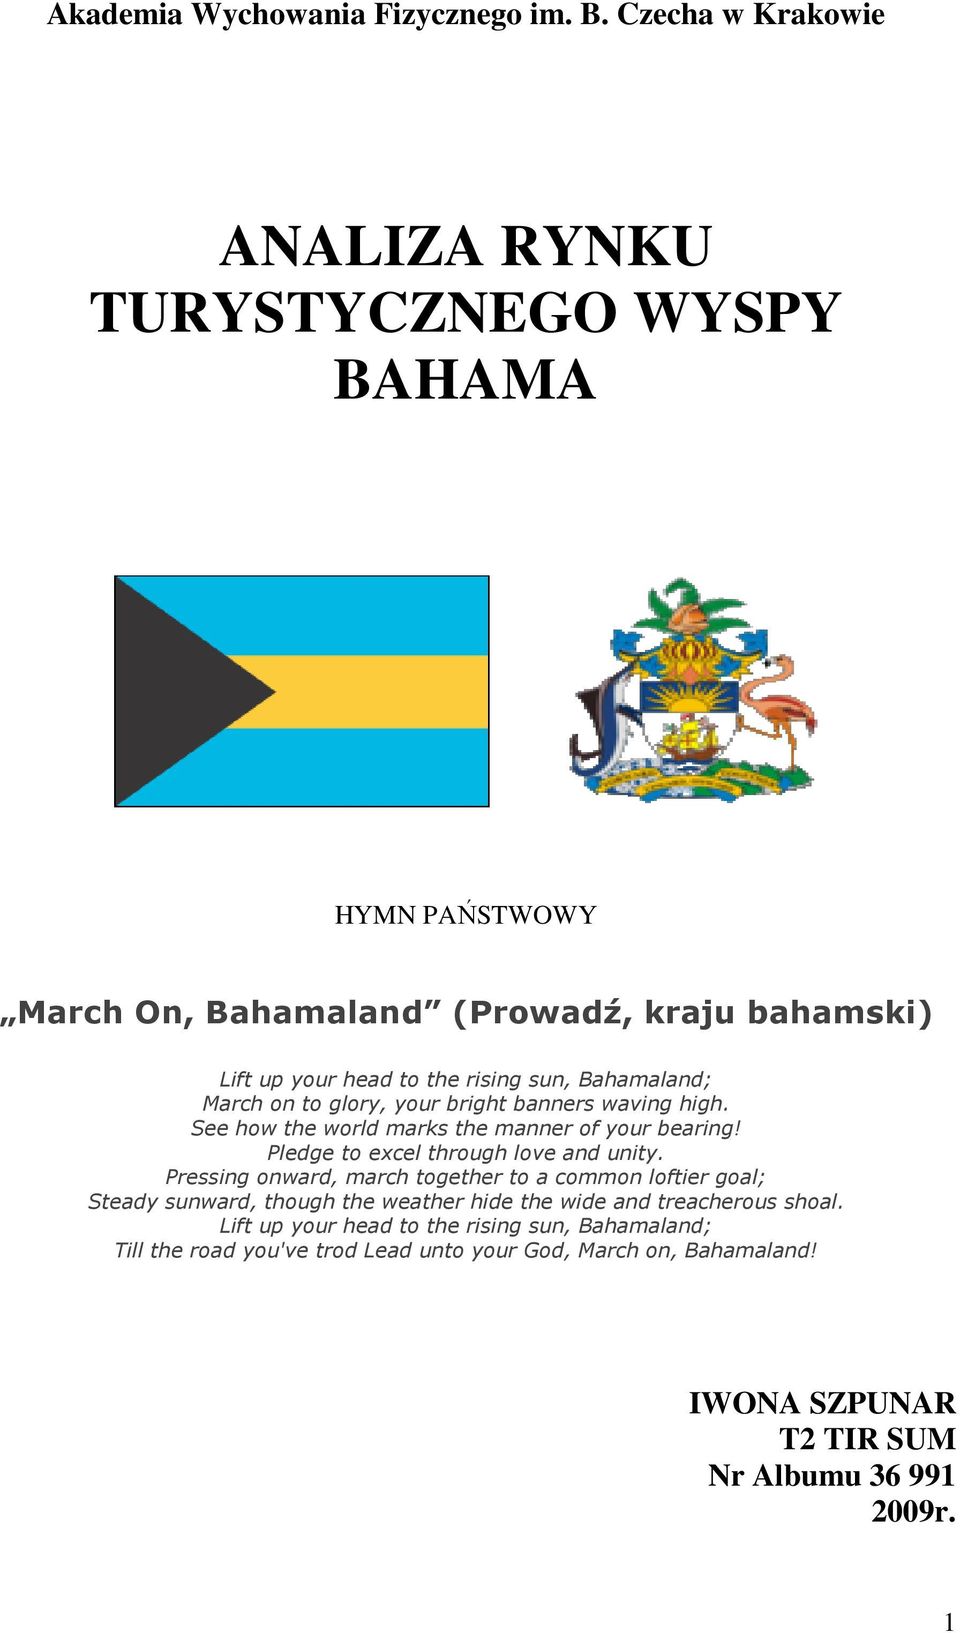 Bahamaland; March on to glory, your bright banners waving high. See how the world marks the manner of your bearing! Pledge to excel through love and unity.